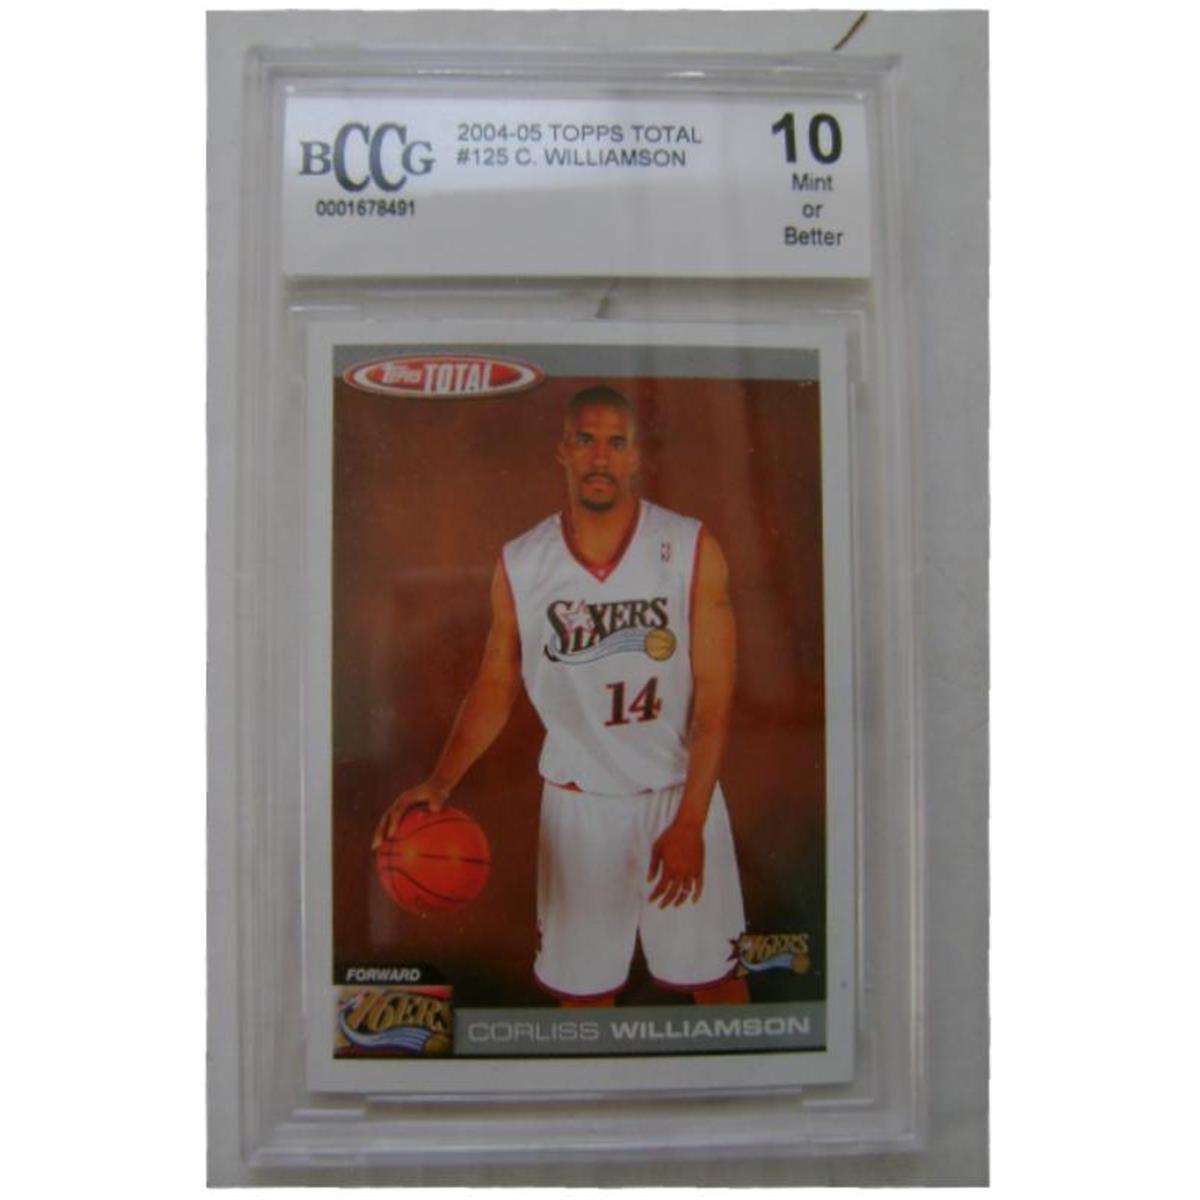 Picture of Autograph Warehouse 409755 Graded Slabbed 10 Mint BCCG 2004 Topps Total 125 Corliss Williamson Trading Card